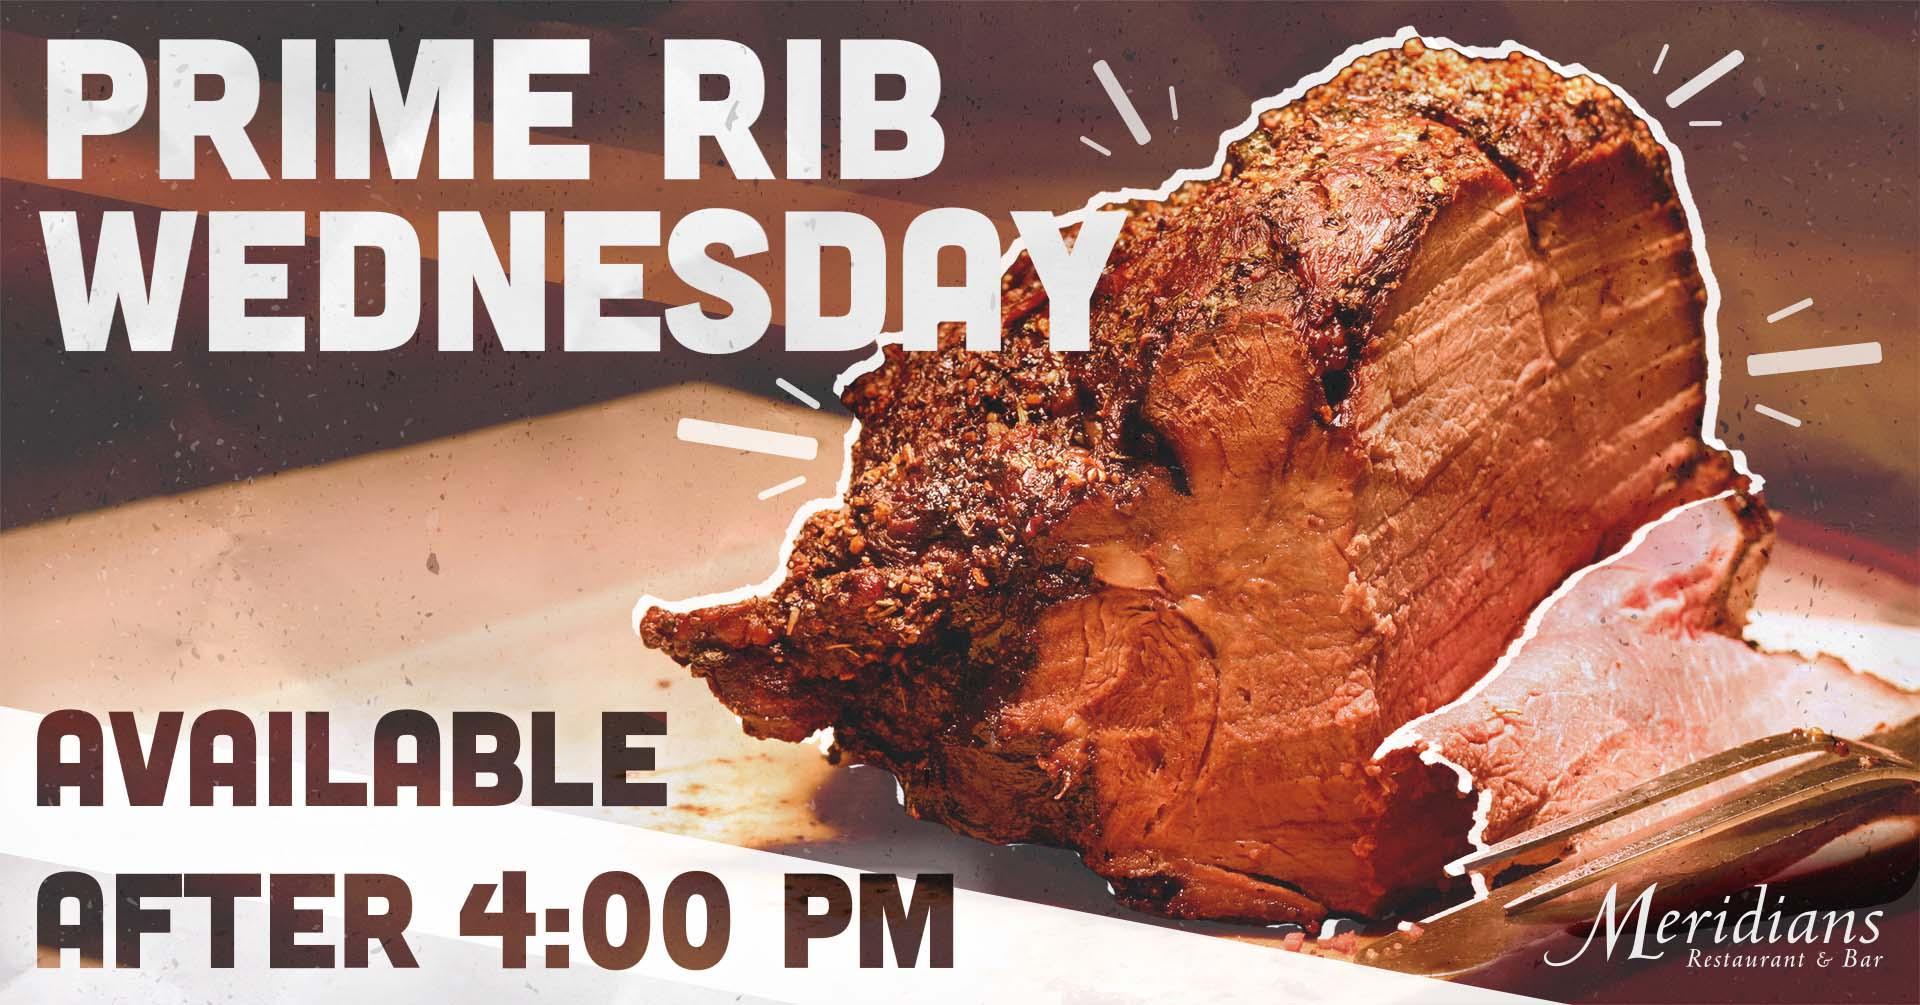 Prime Rib Wednesdays, Available after 4:00 PM